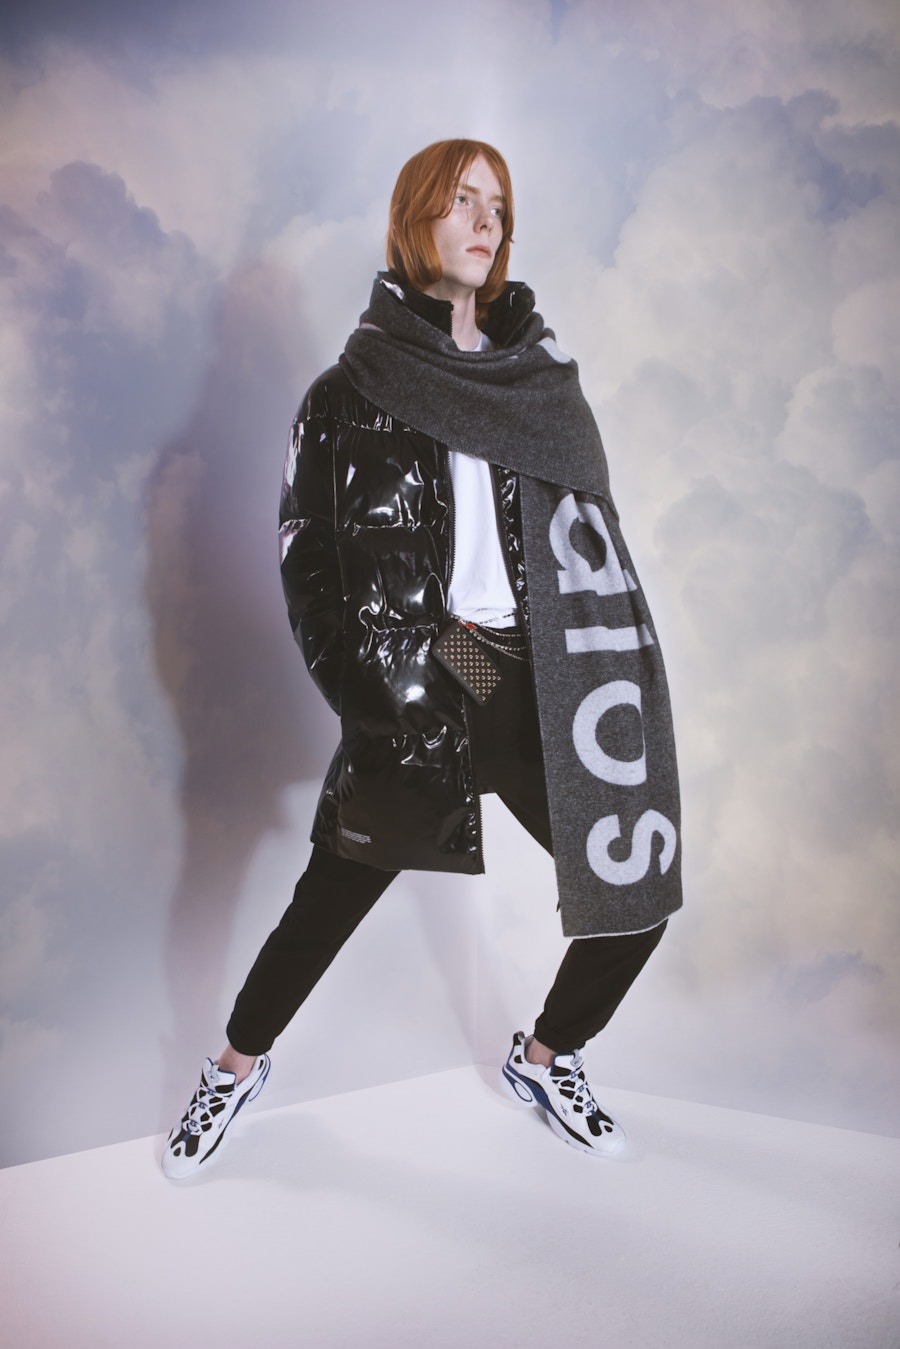 A model standing in front of a cloud background